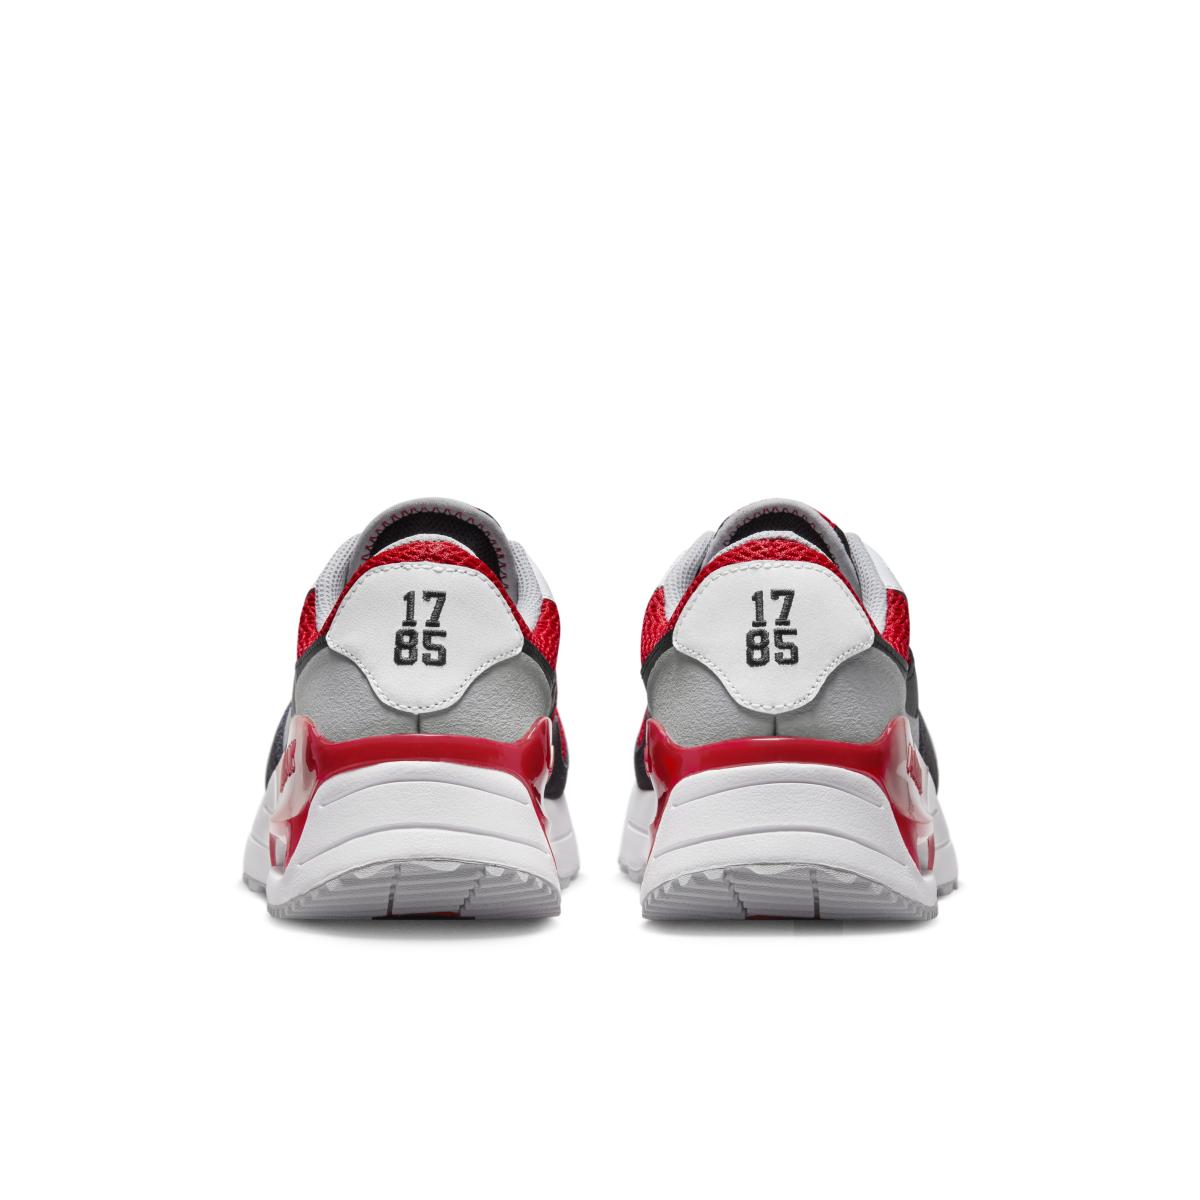 Georgia Bulldogs Nike Air Max Collection, how to buy your UGA Air Max ...